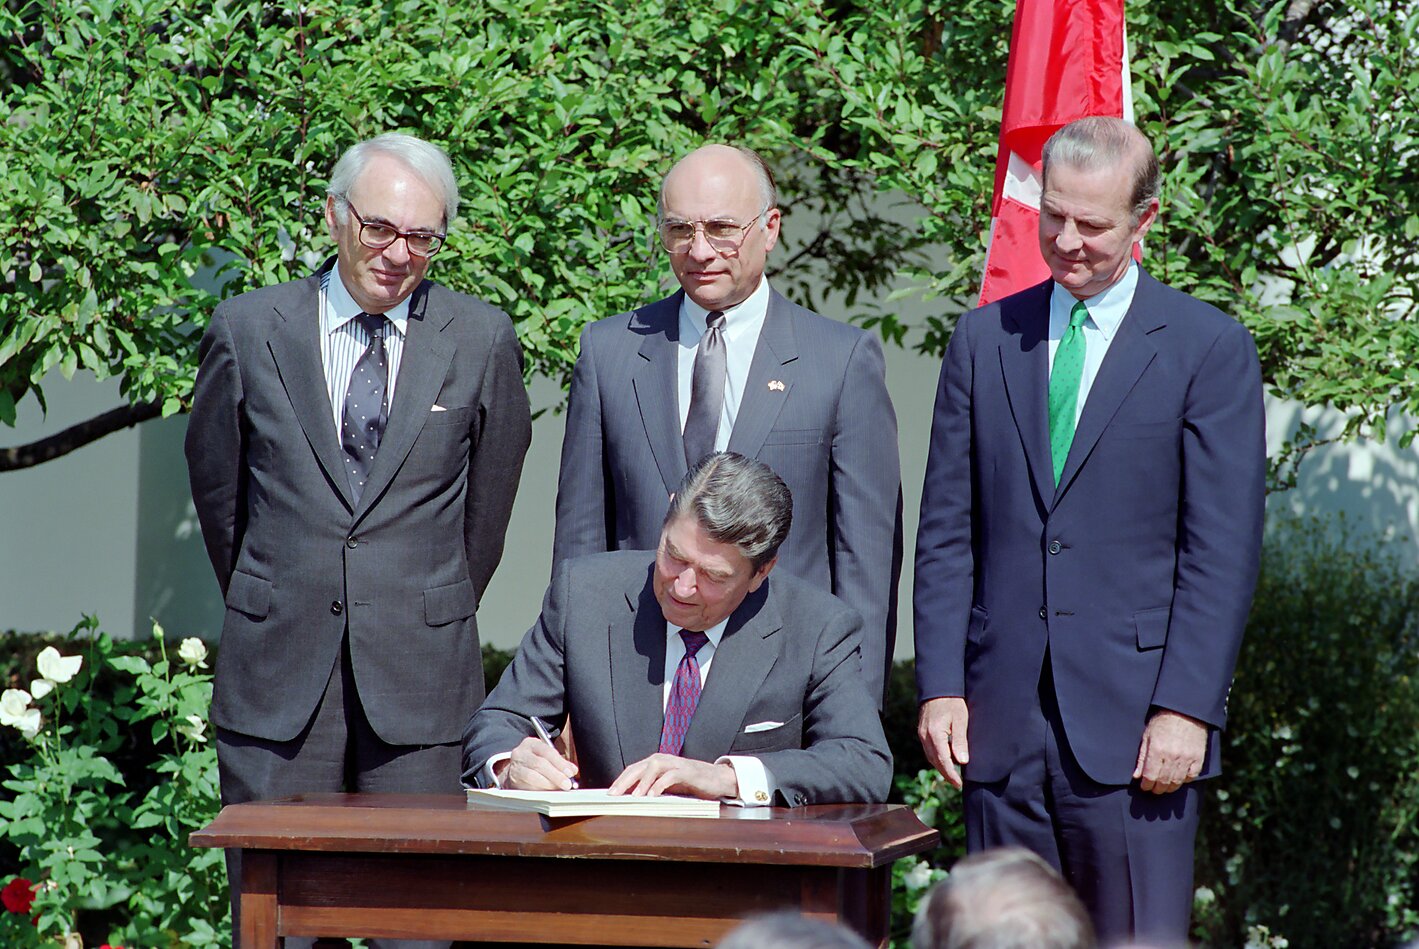 President Reagan in the Rose Garden signing the Canada United States Free Trade Agreement FTA with James Baker Clayton Yeutter and Allan Gotlieb looking on.